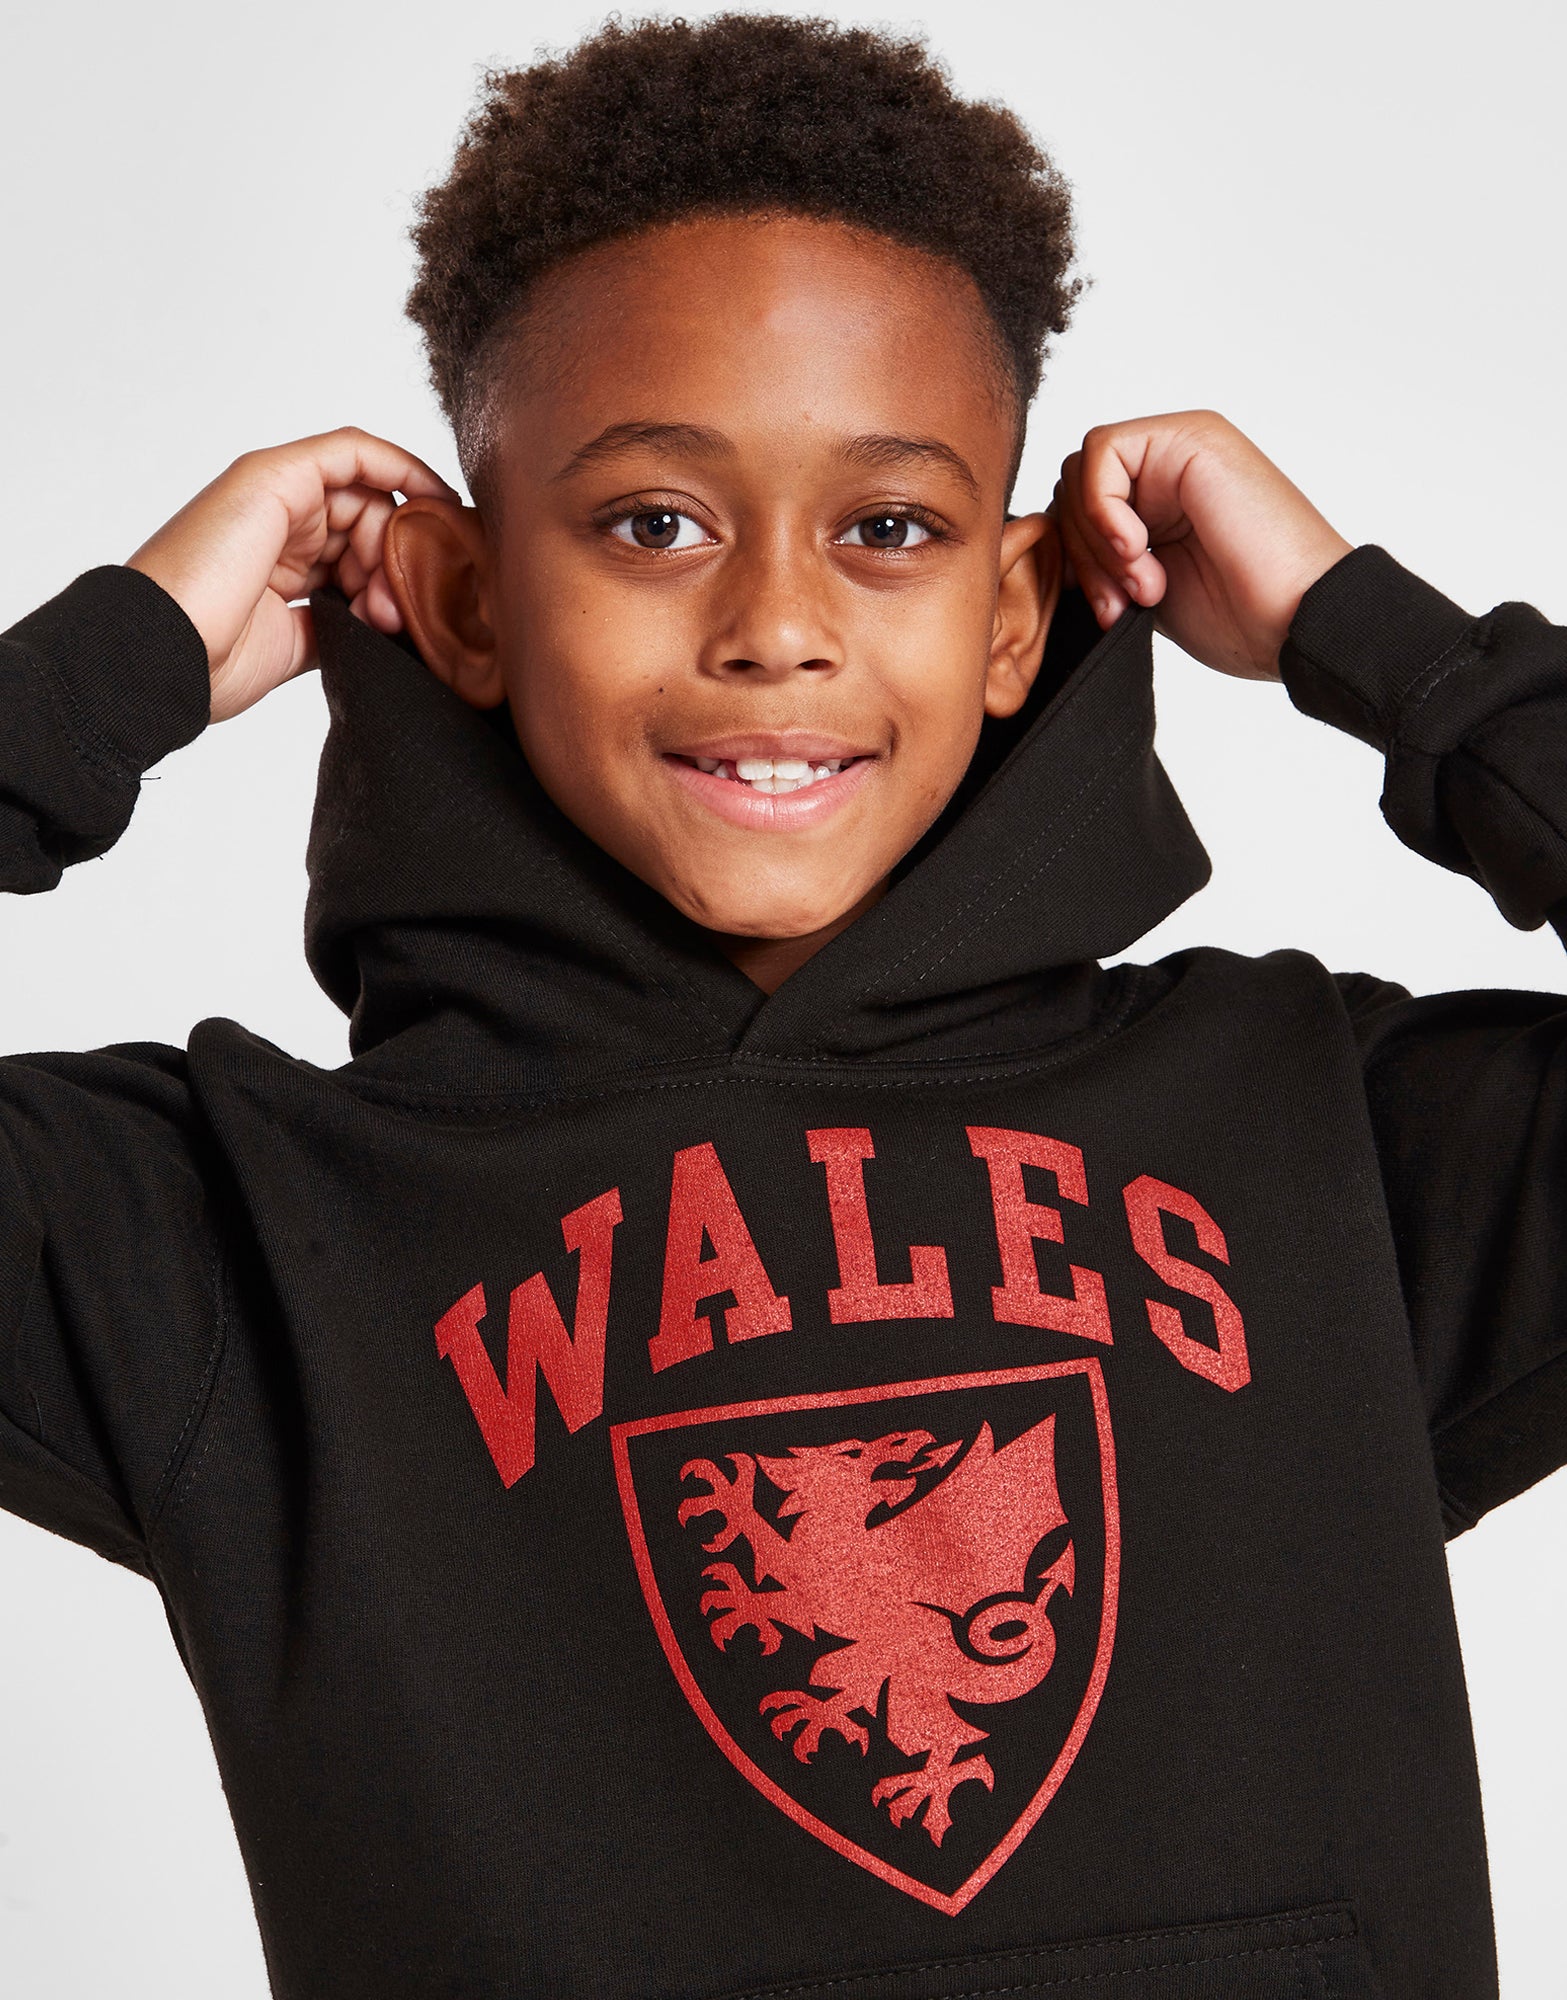 Official Team Wales Kids Hoodie - Black - The World Football Store